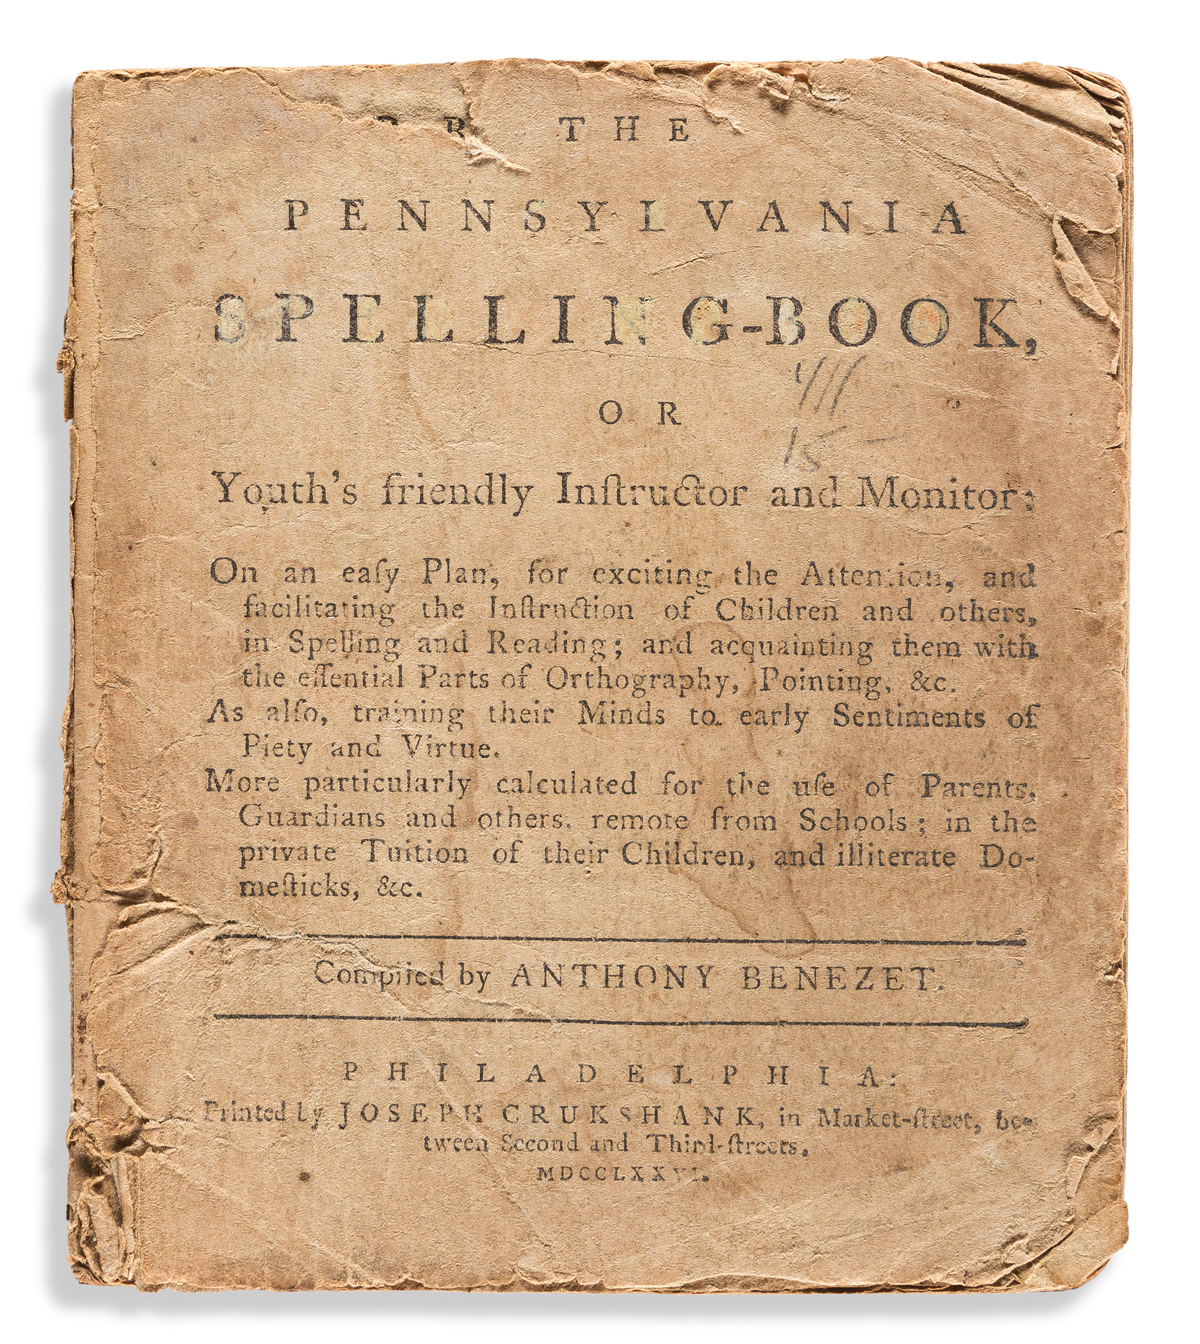 (EARLY AMERICAN IMPRINT.) Anthony Benezet. The Pennsylvania Spelling-Book.